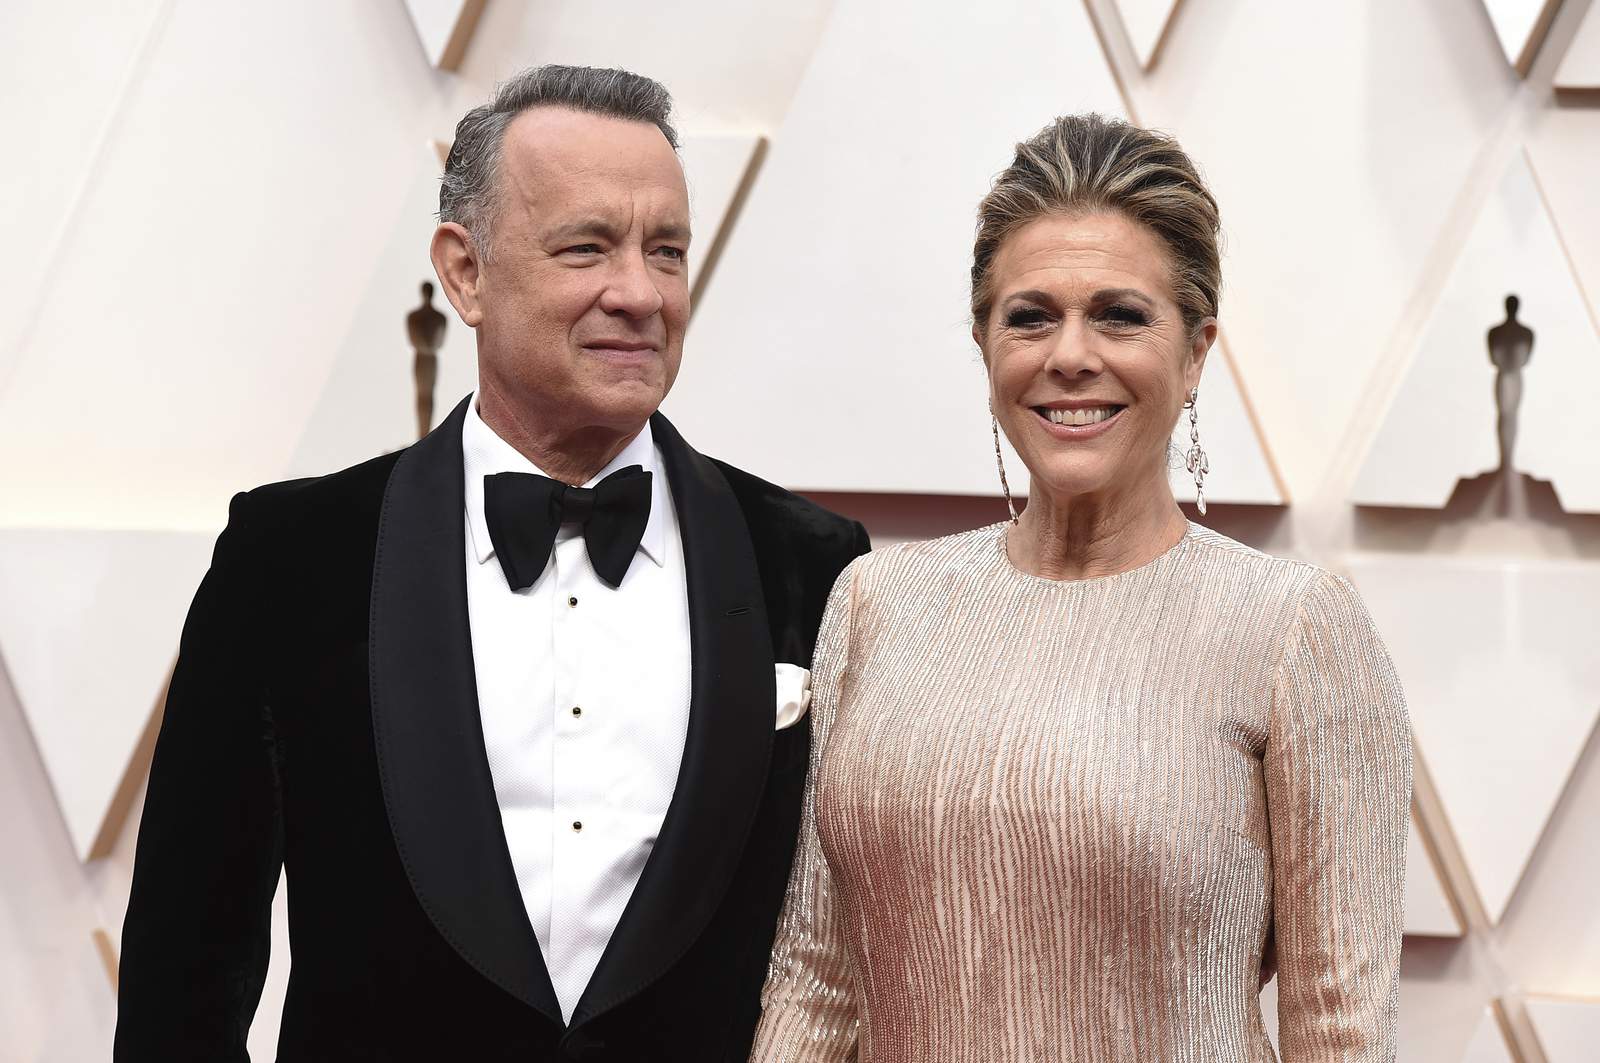 Tom Hanks says he has the 'blahs' but no fever in isolation